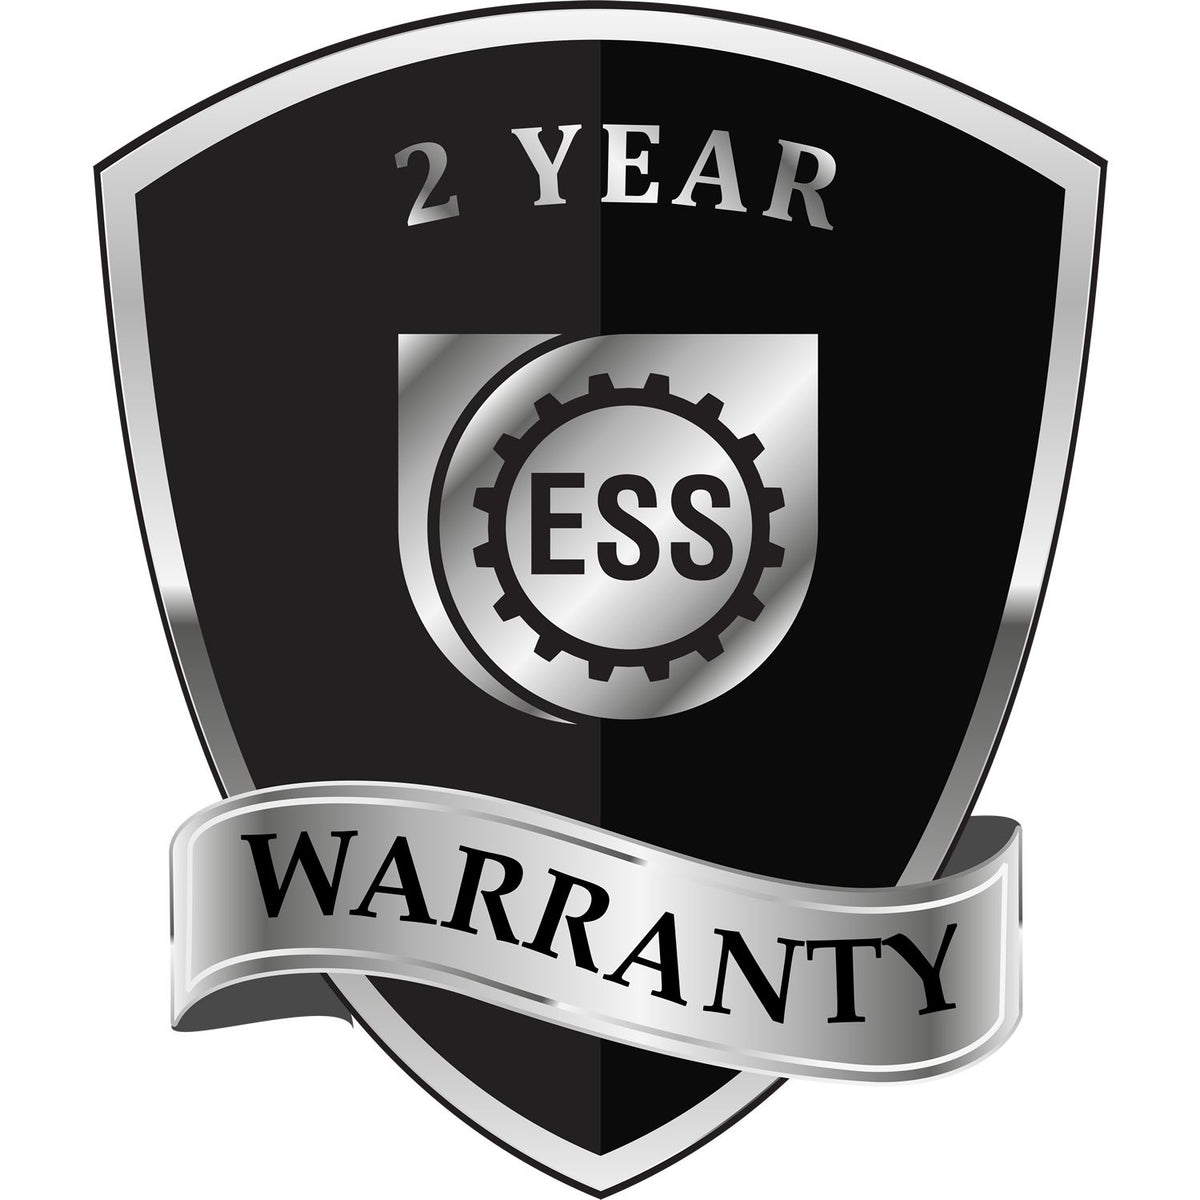 A black and silver badge or emblem showing warranty information for the Hybrid Missouri Engineer Seal